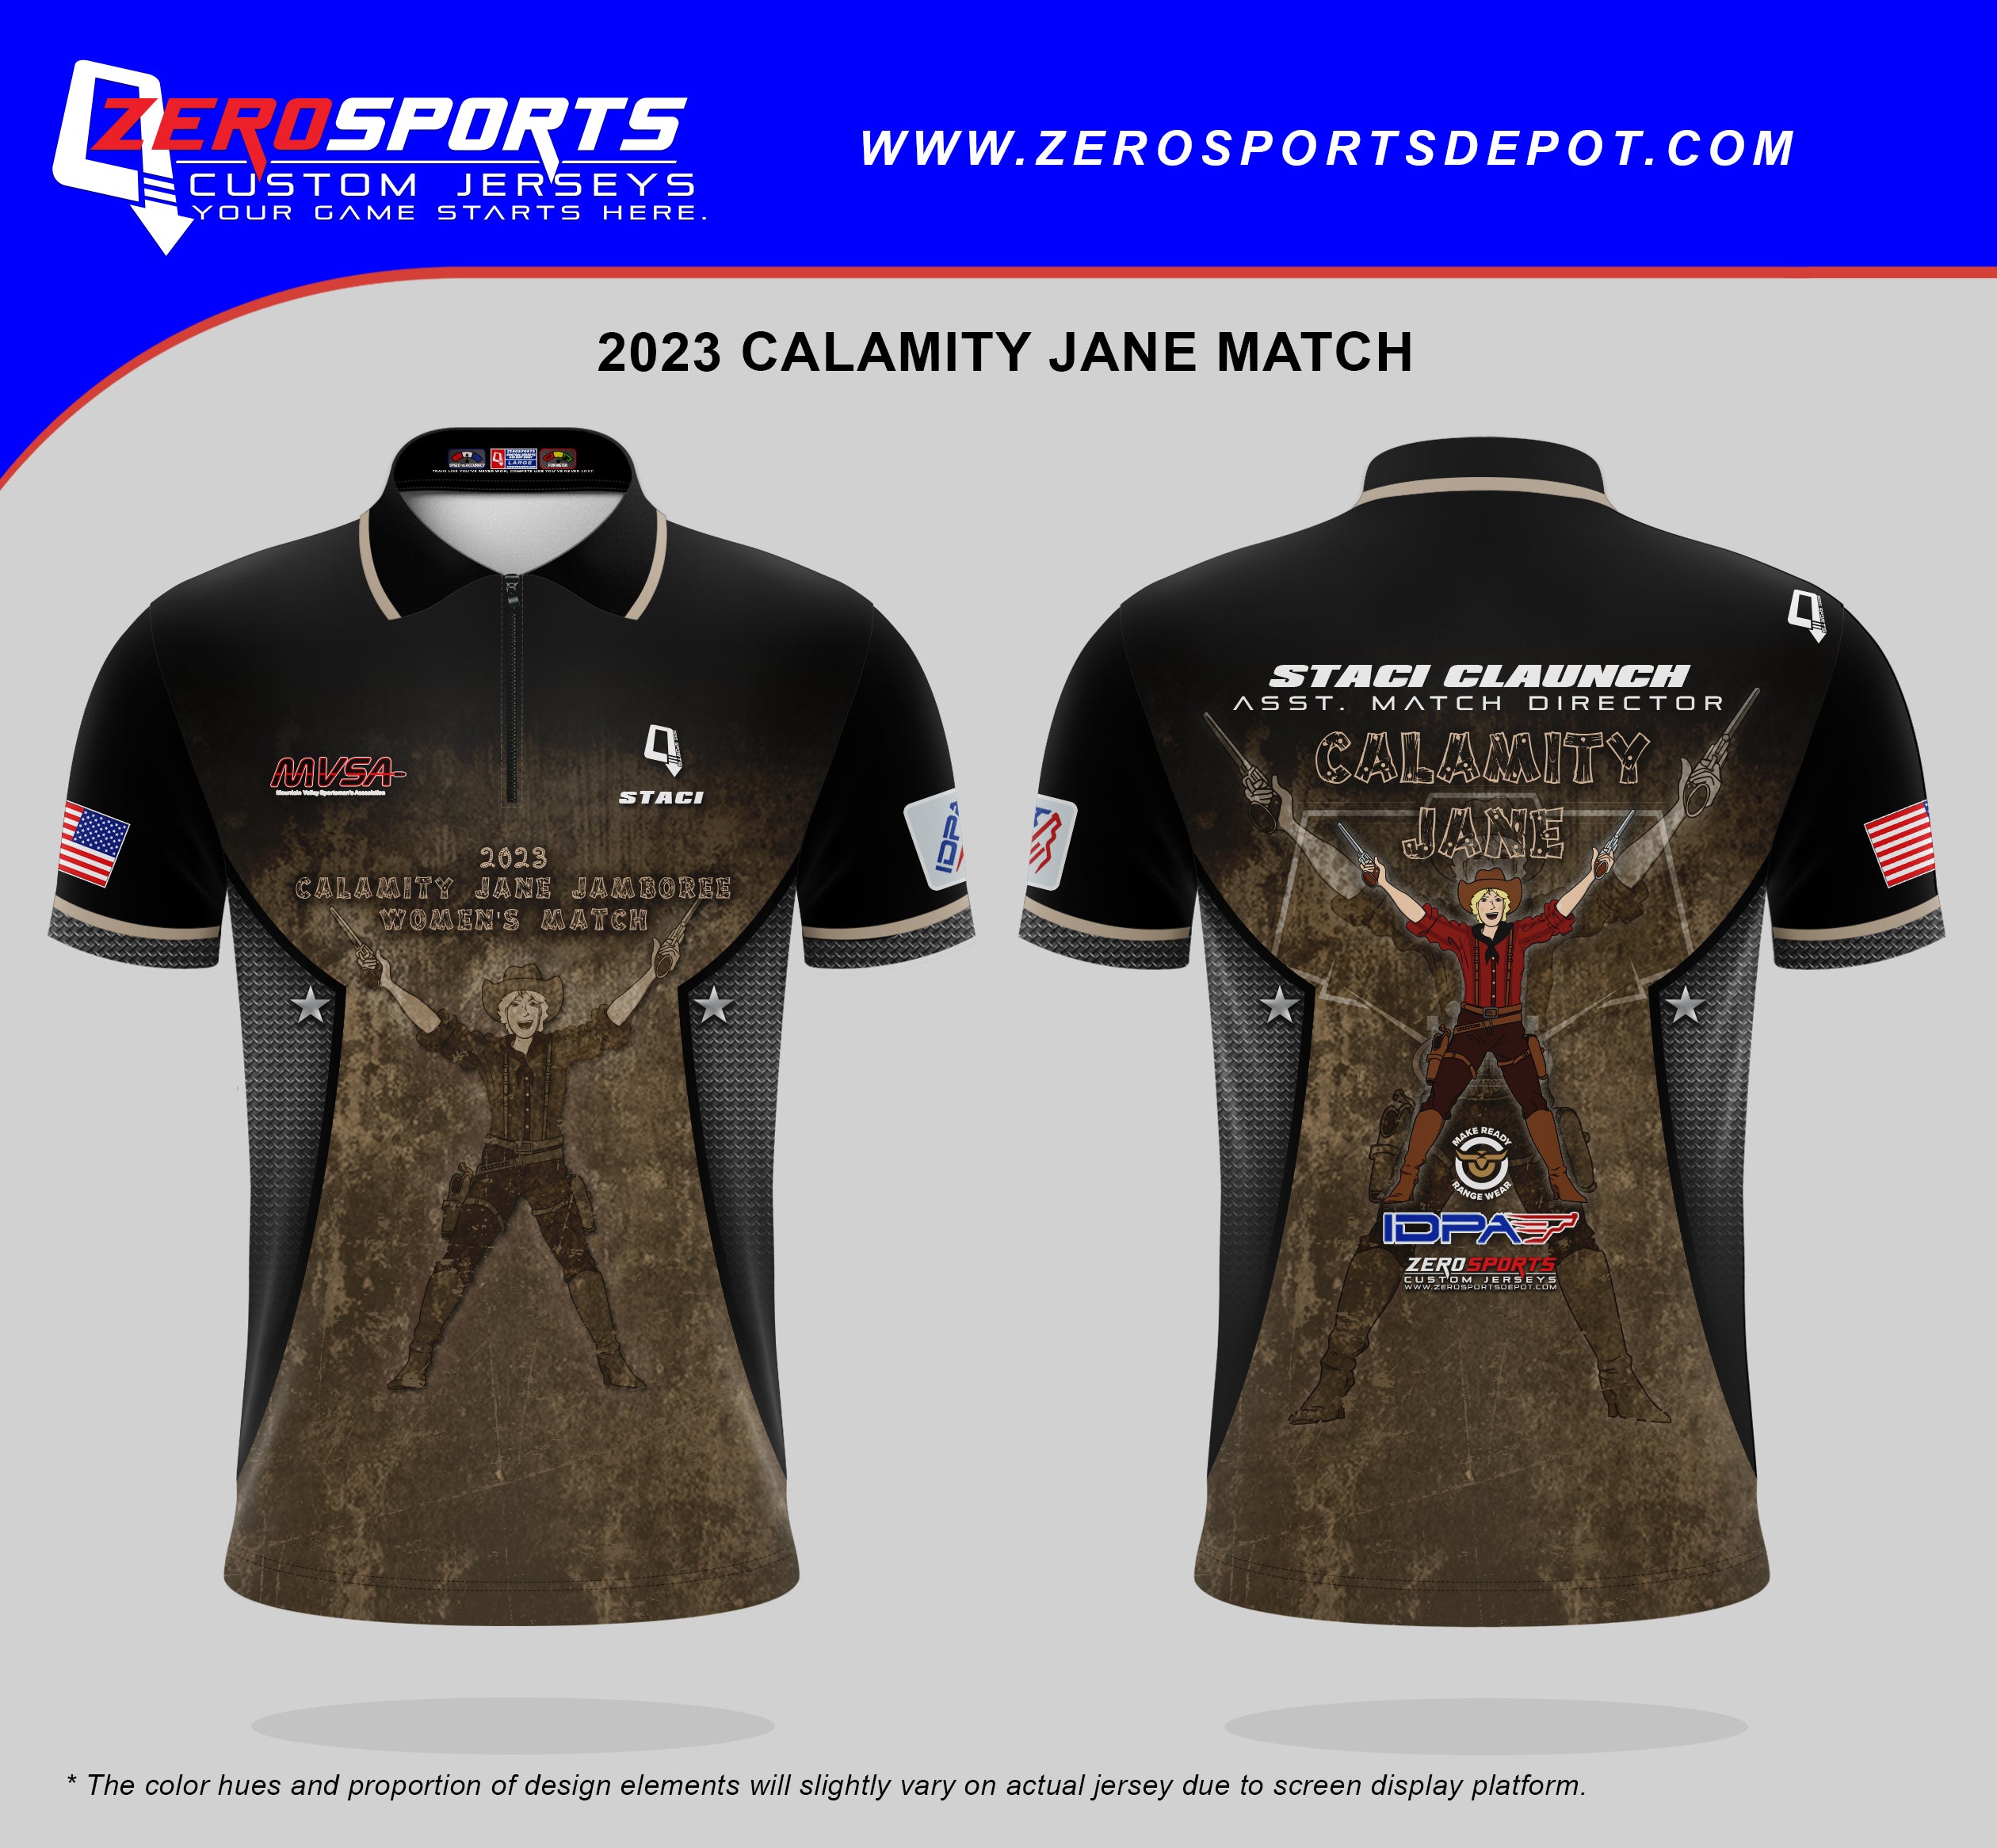 MVSA Calamity Jane Jamboree 2023 Match Jersey  **All orders after 9/18/2023 will be shipped directly to your address after the match.